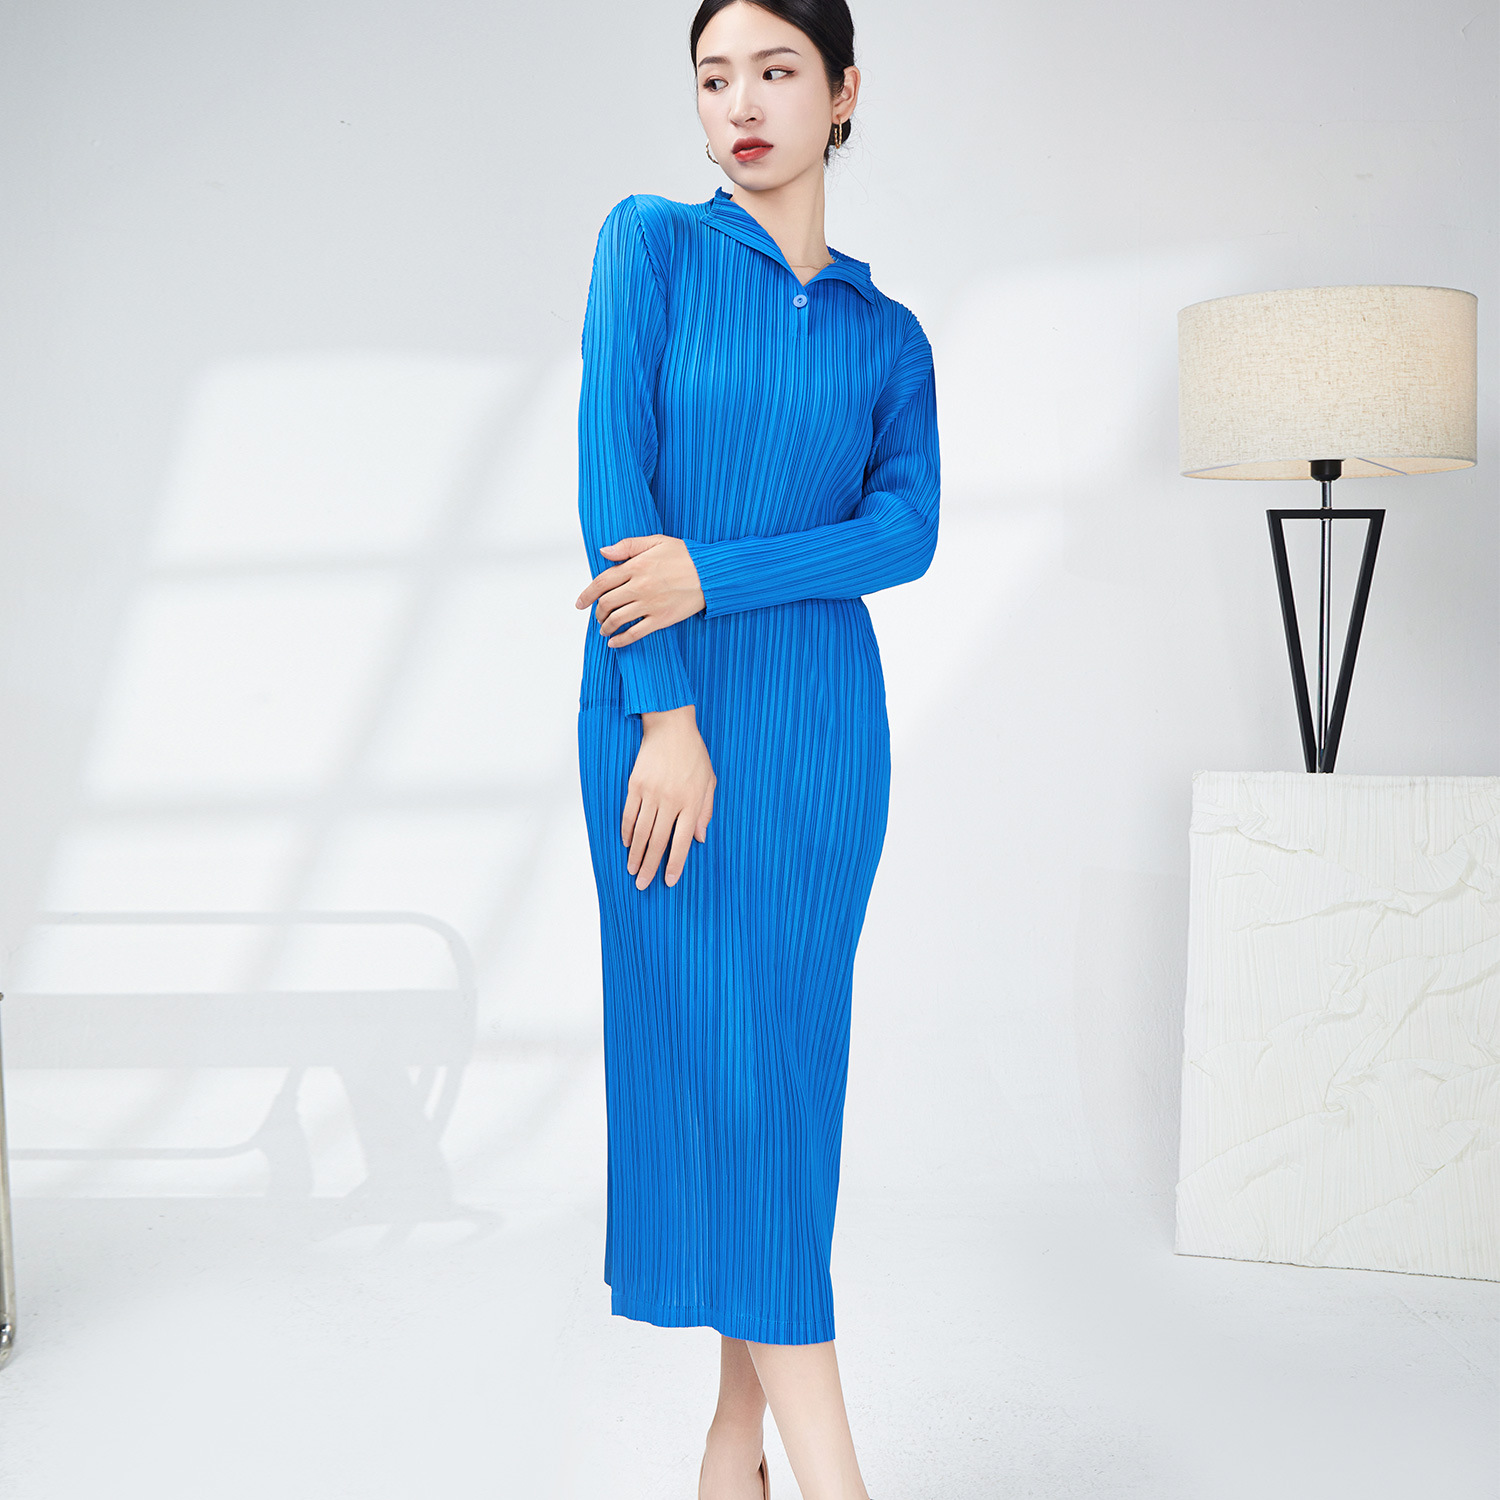 Sophisticated Silhouettes for All lady's fashion Fashion Dresses Classic dresses with a modern twist